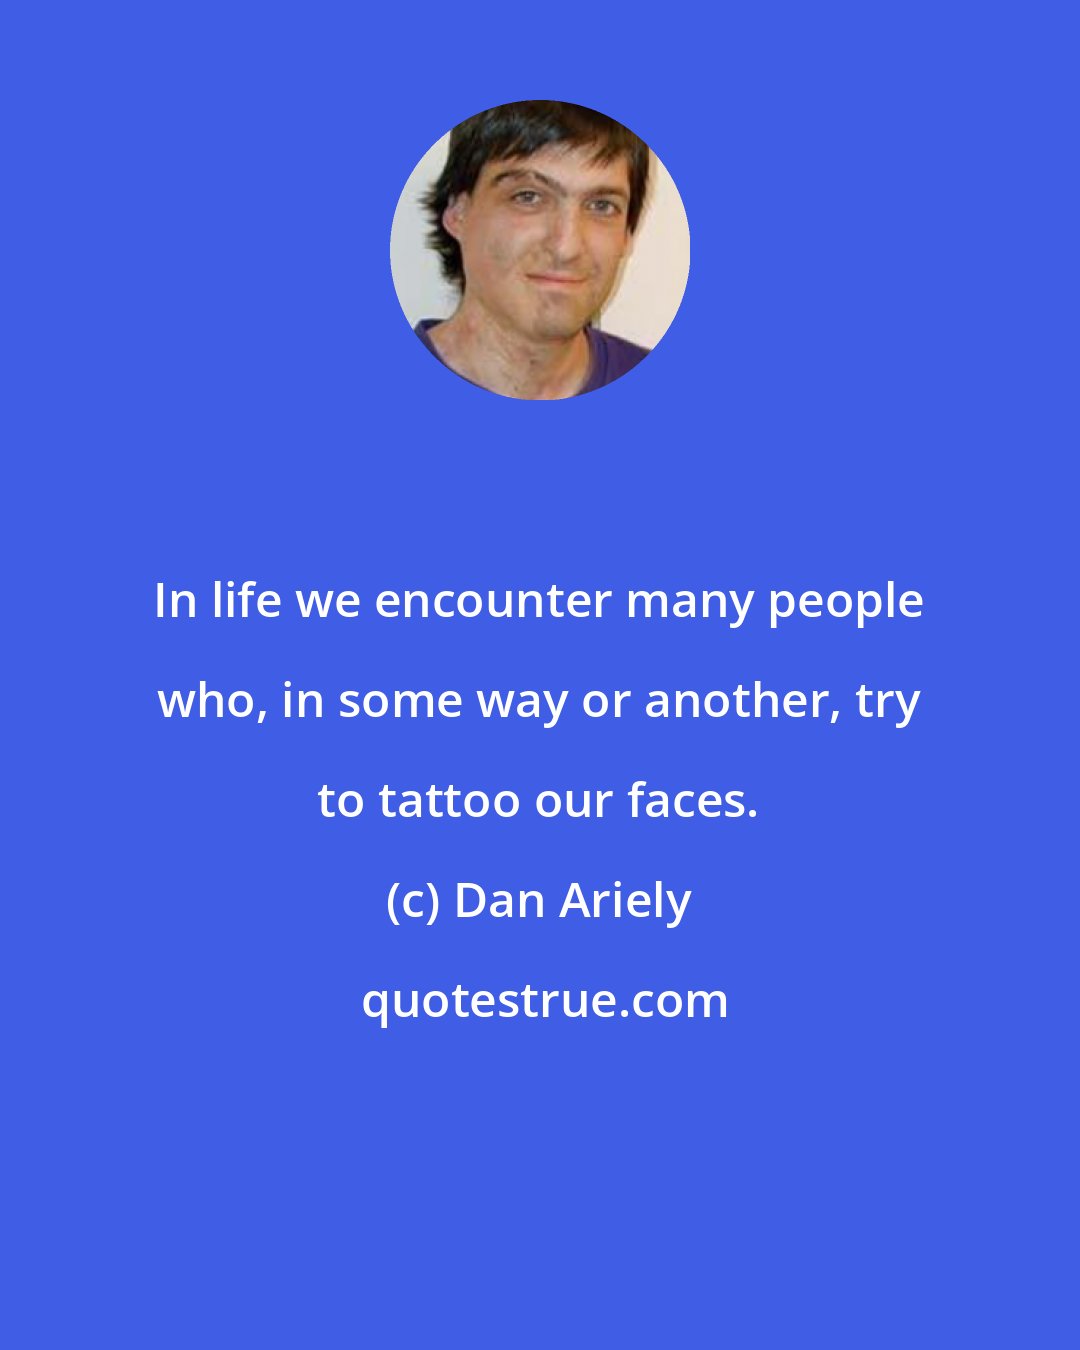 Dan Ariely: In life we encounter many people who, in some way or another, try to tattoo our faces.